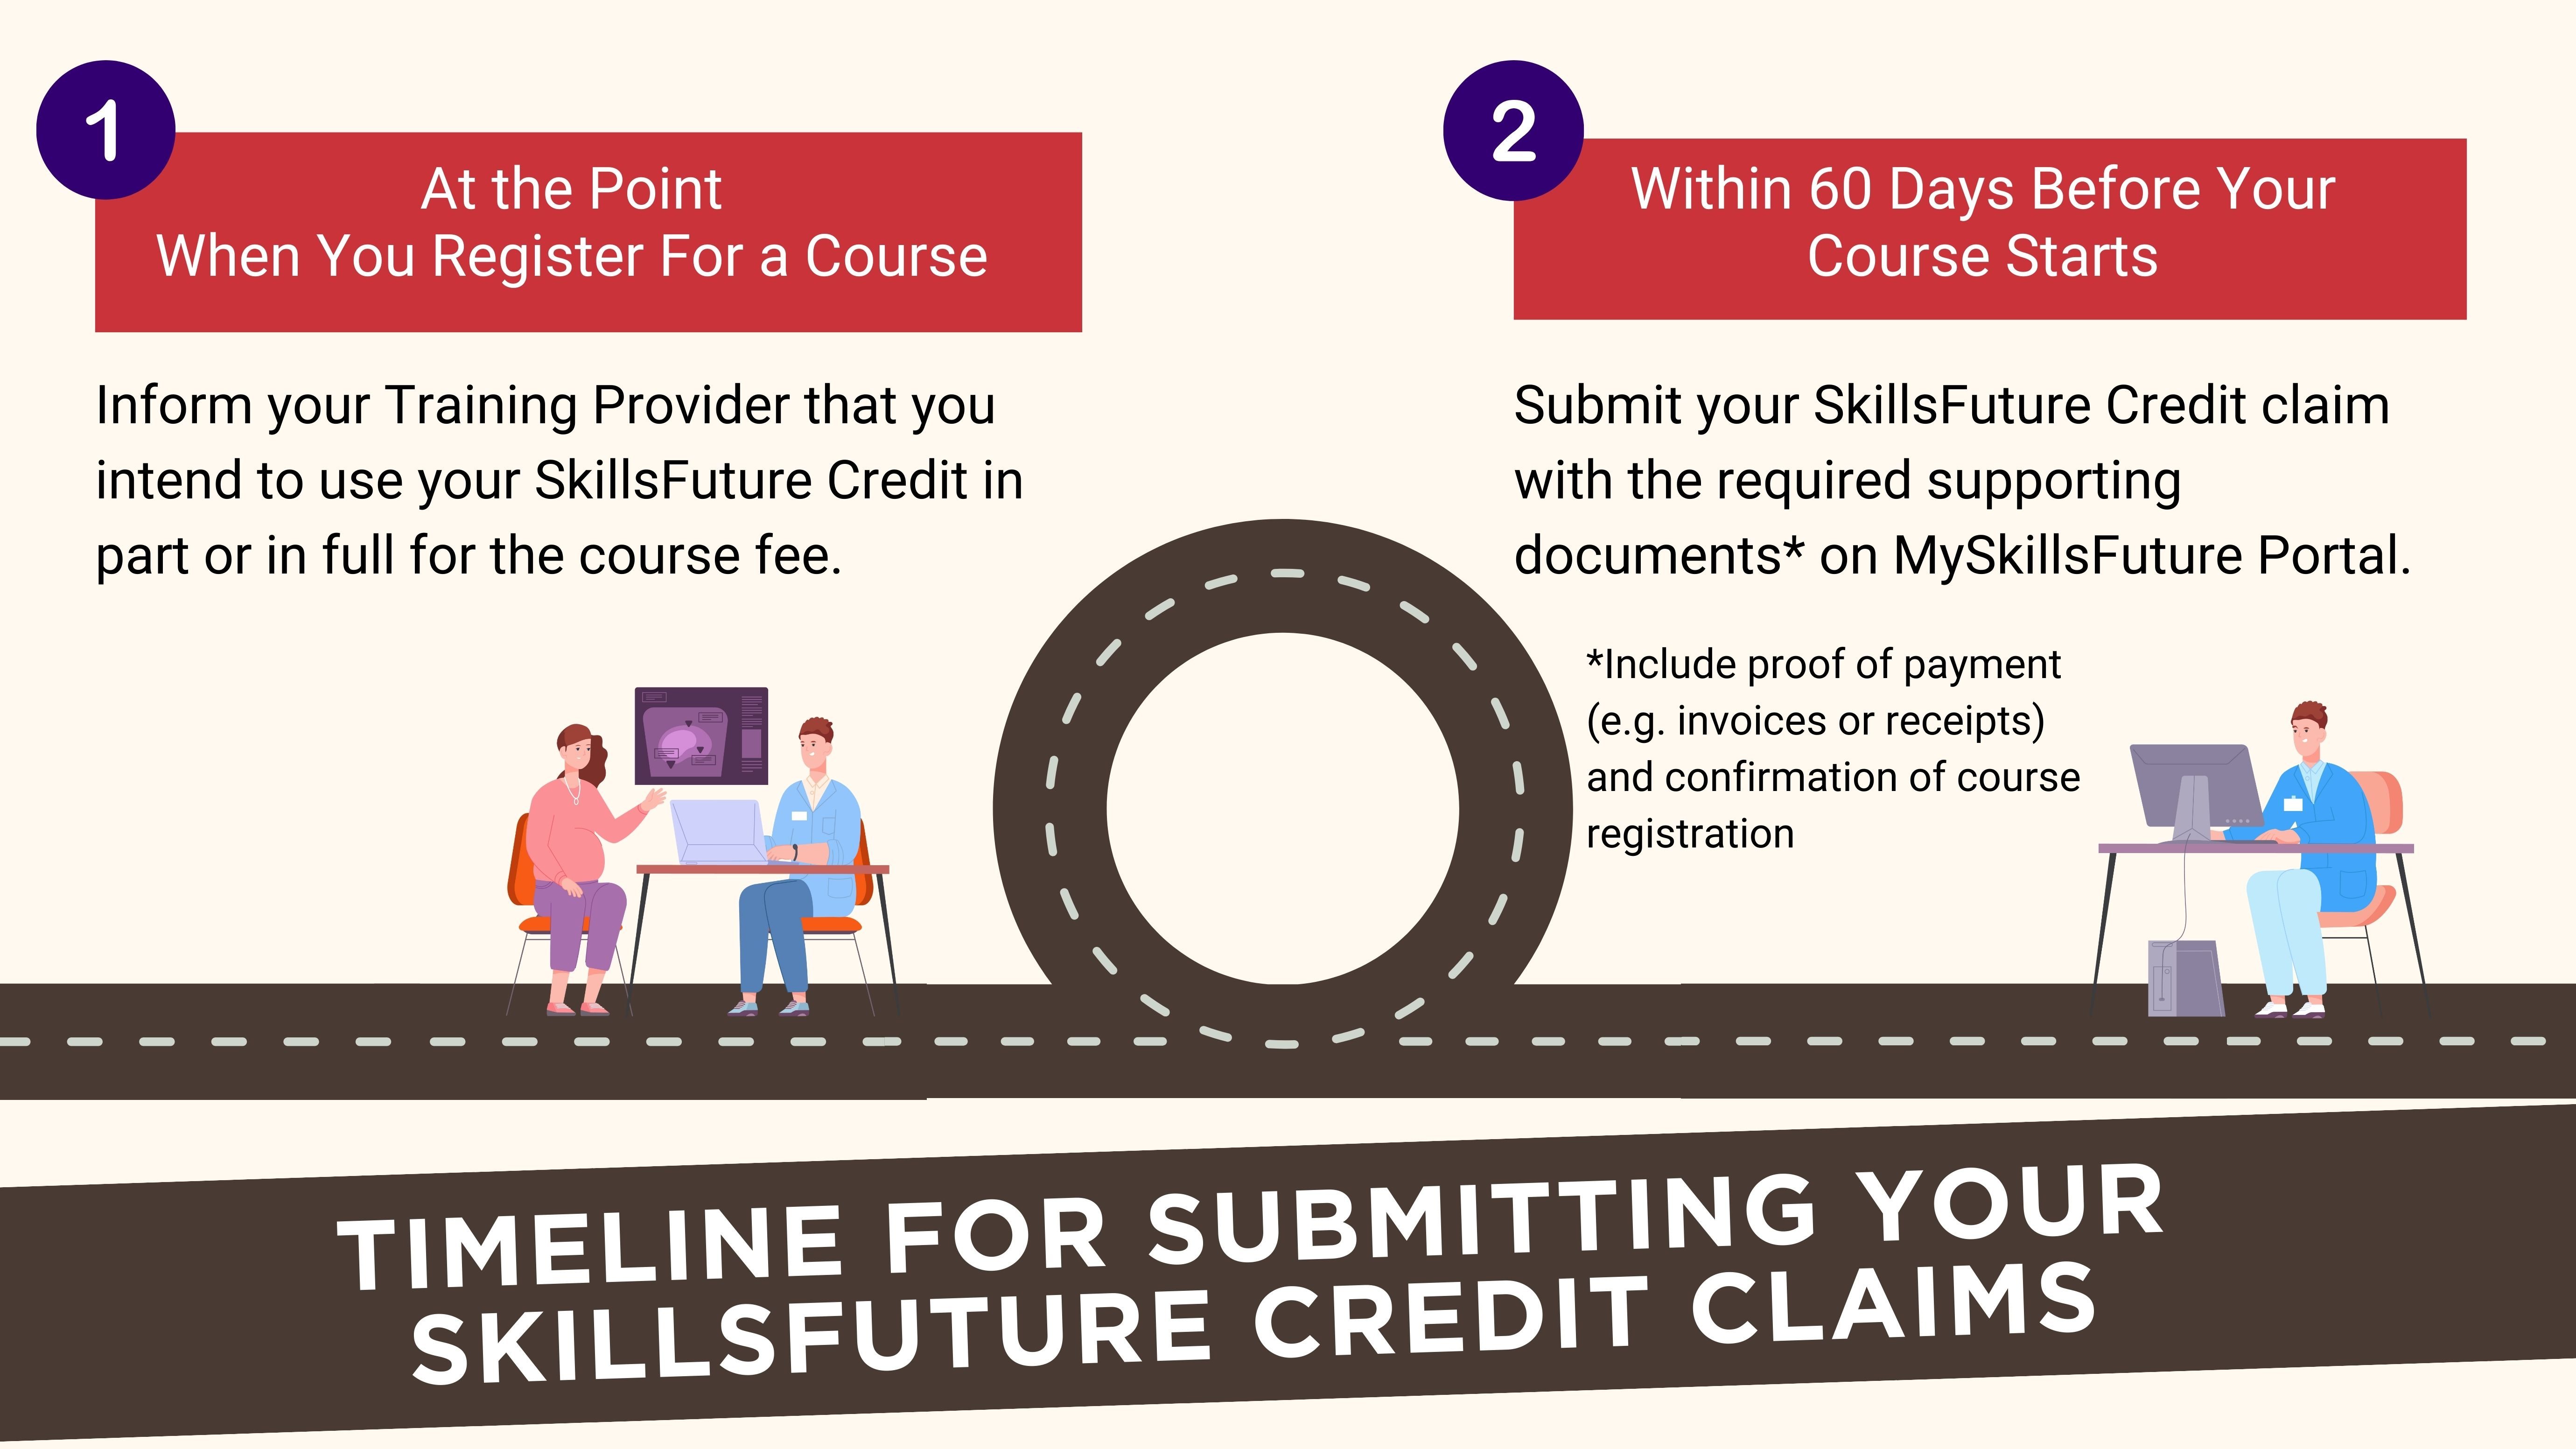 Timeline for submitting your SFC Claims